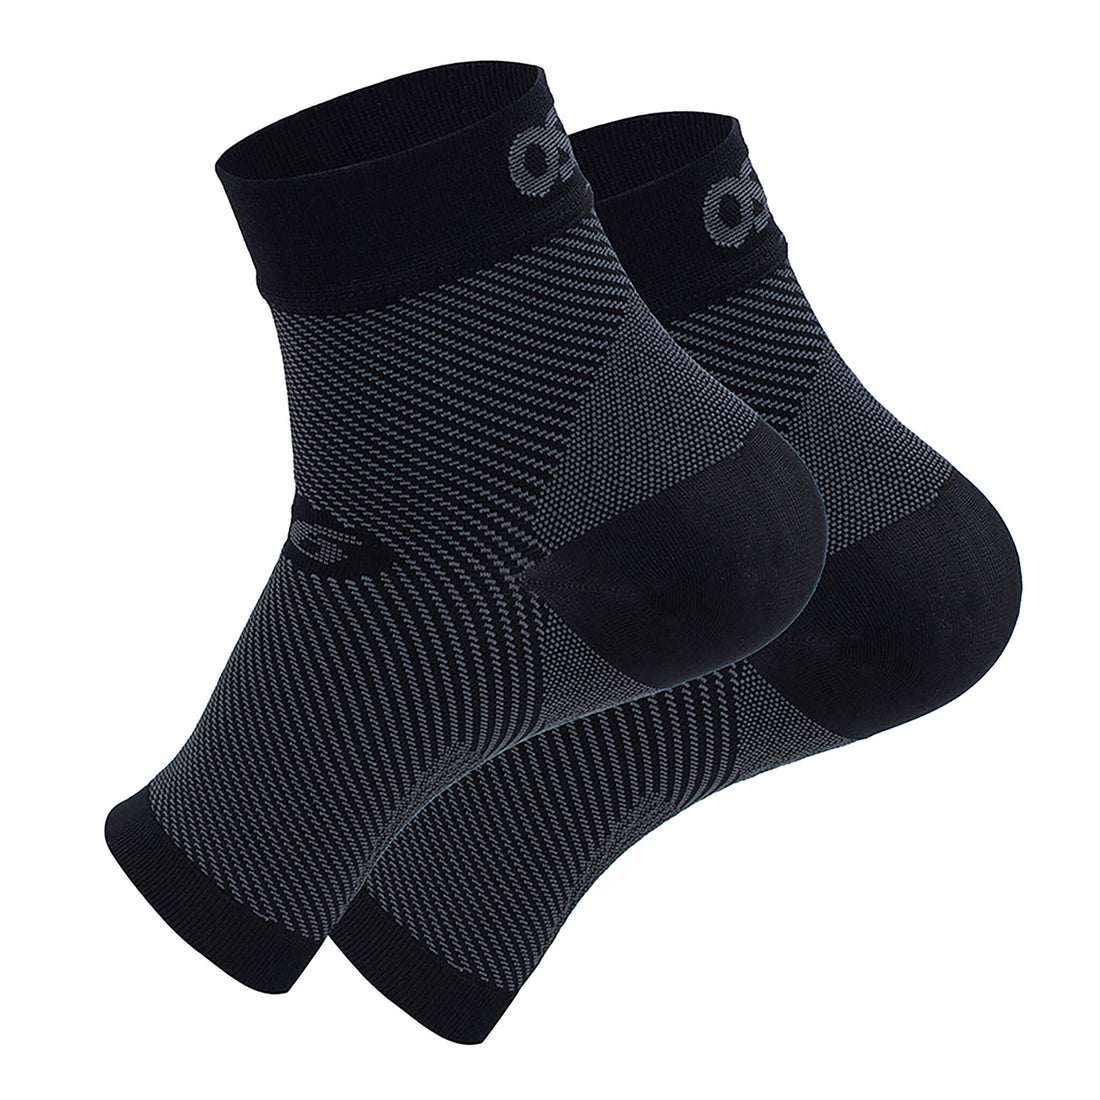 FS6 Foot Compression Sleeves - Soft Support For Pain, Swelling &amp; Fatigue Relief